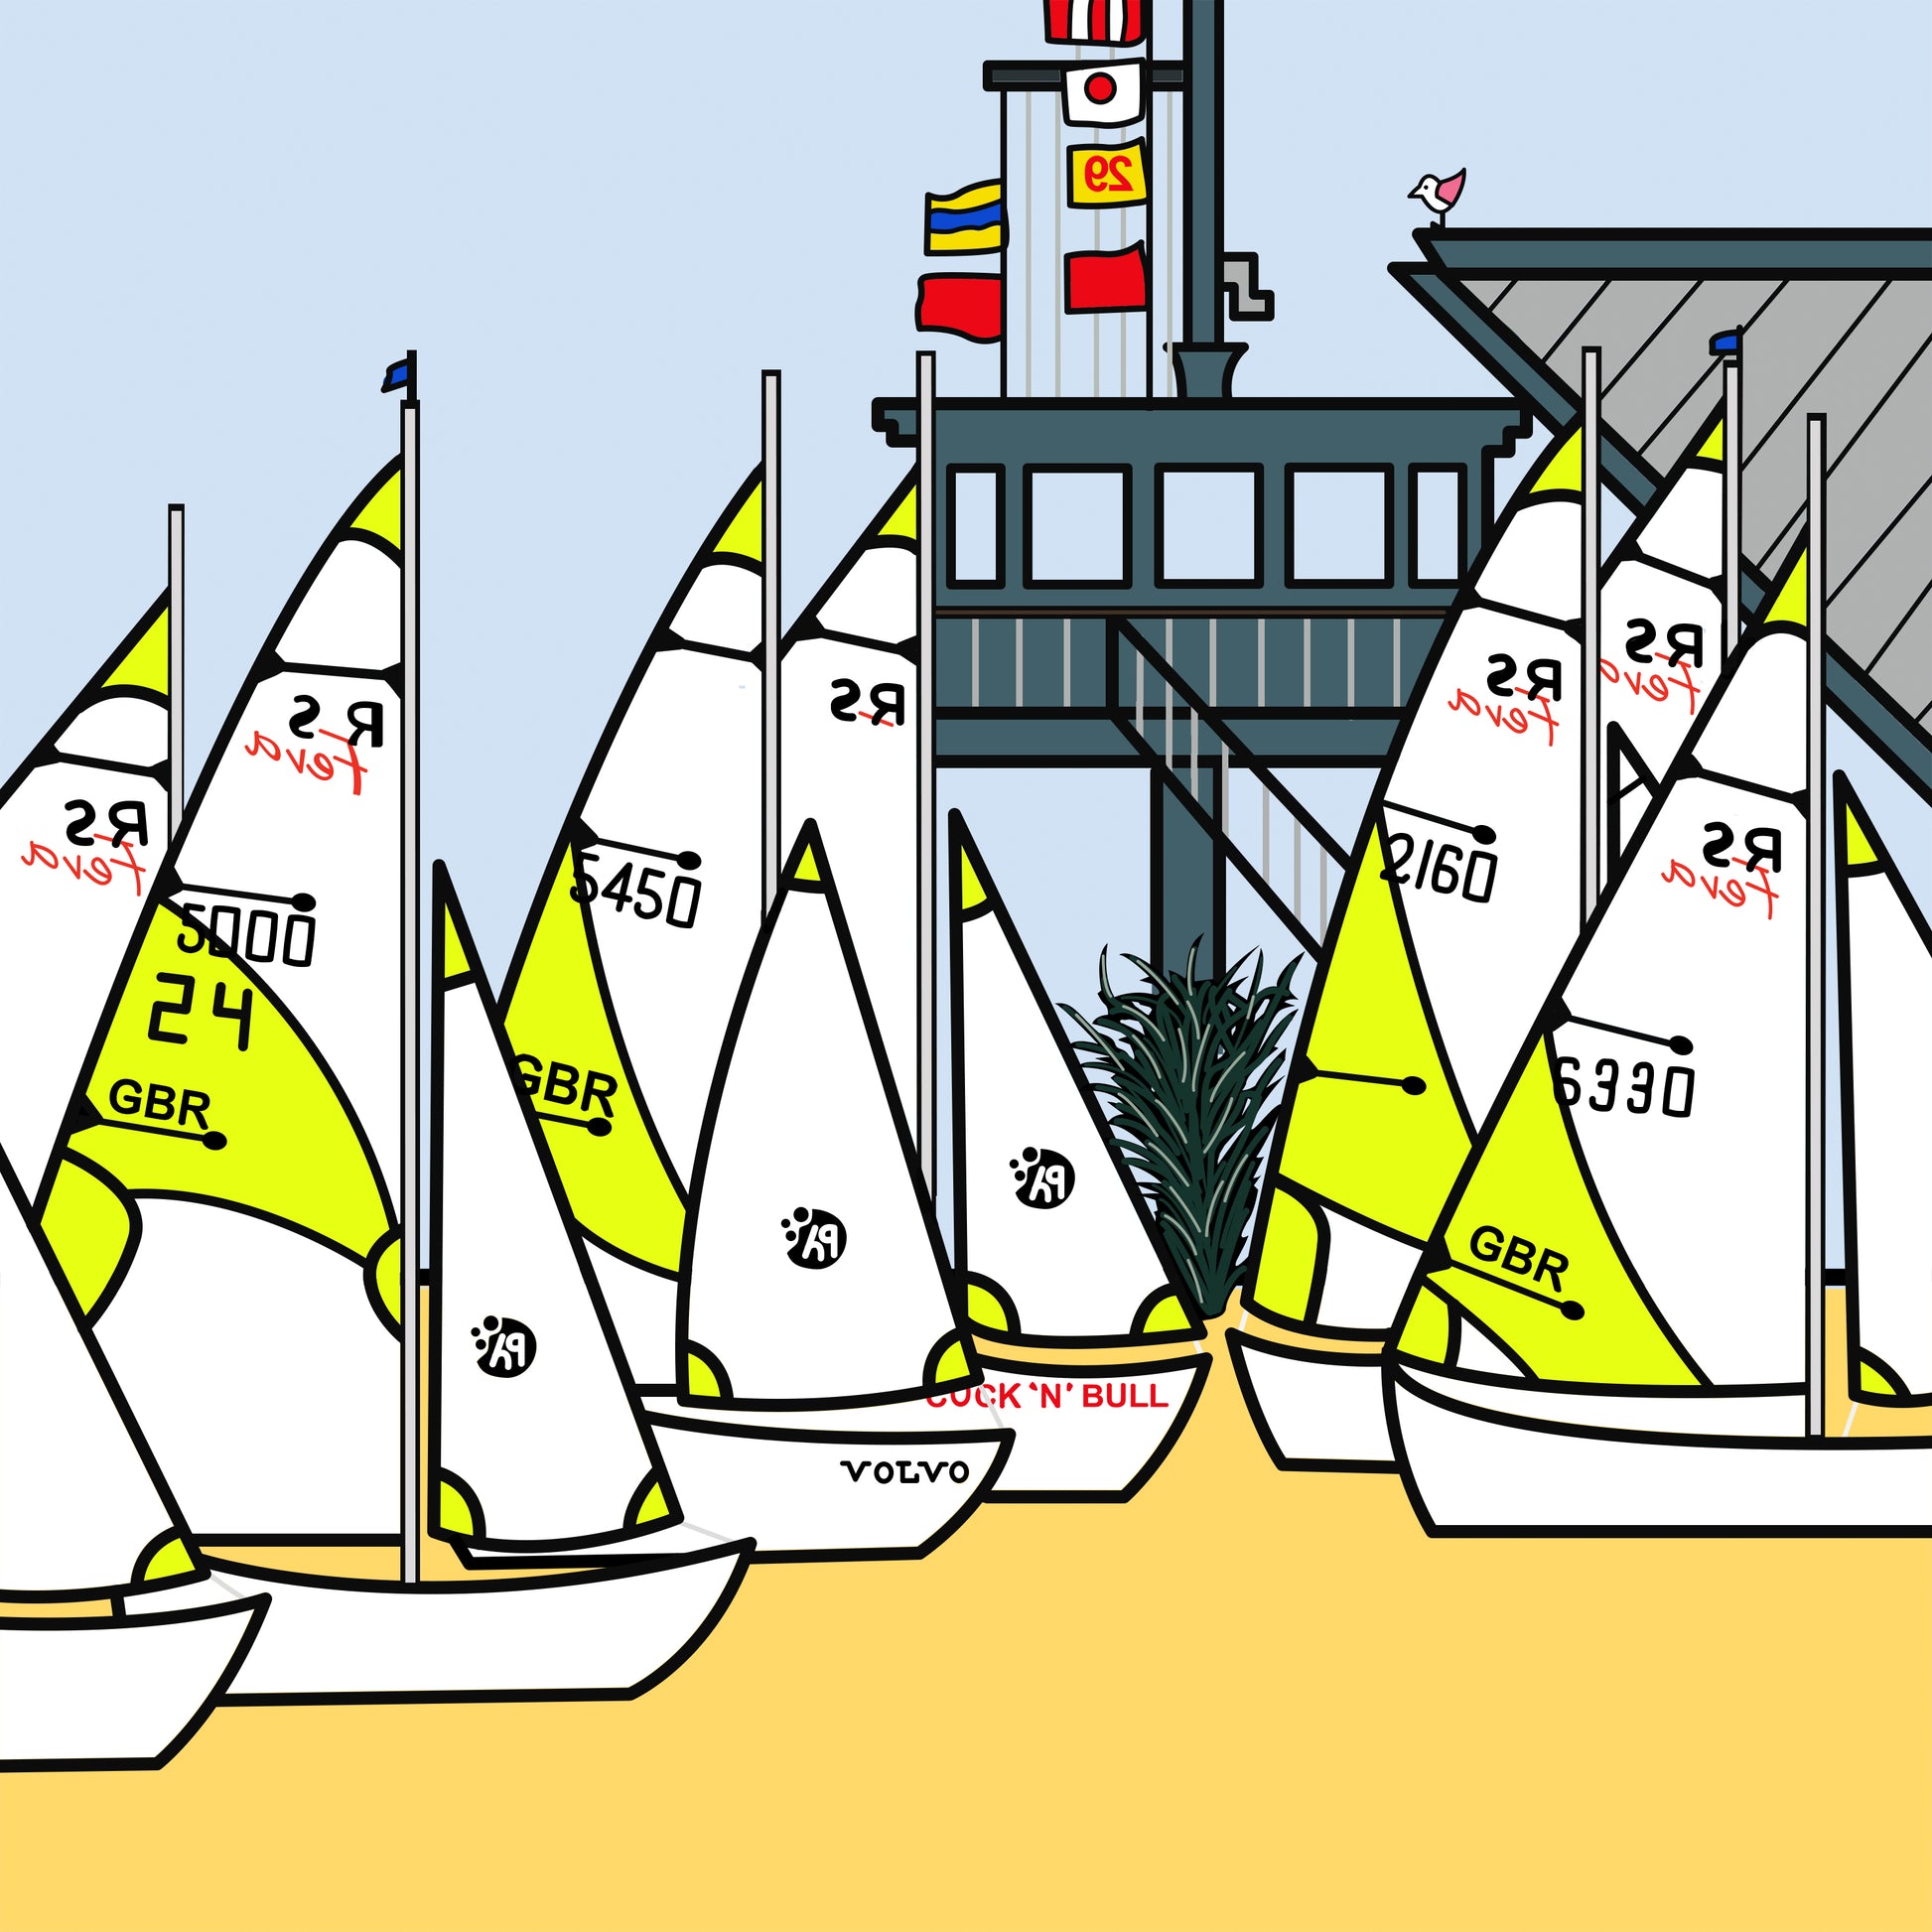 Six sailing boats with GBR are docked on a yellow sand coloured floor. In the background is a plant with wooden decking that has a pole of flags. There are steps leading up to the decked building and a small pink winged seagull is pearched on top of the wooden building.